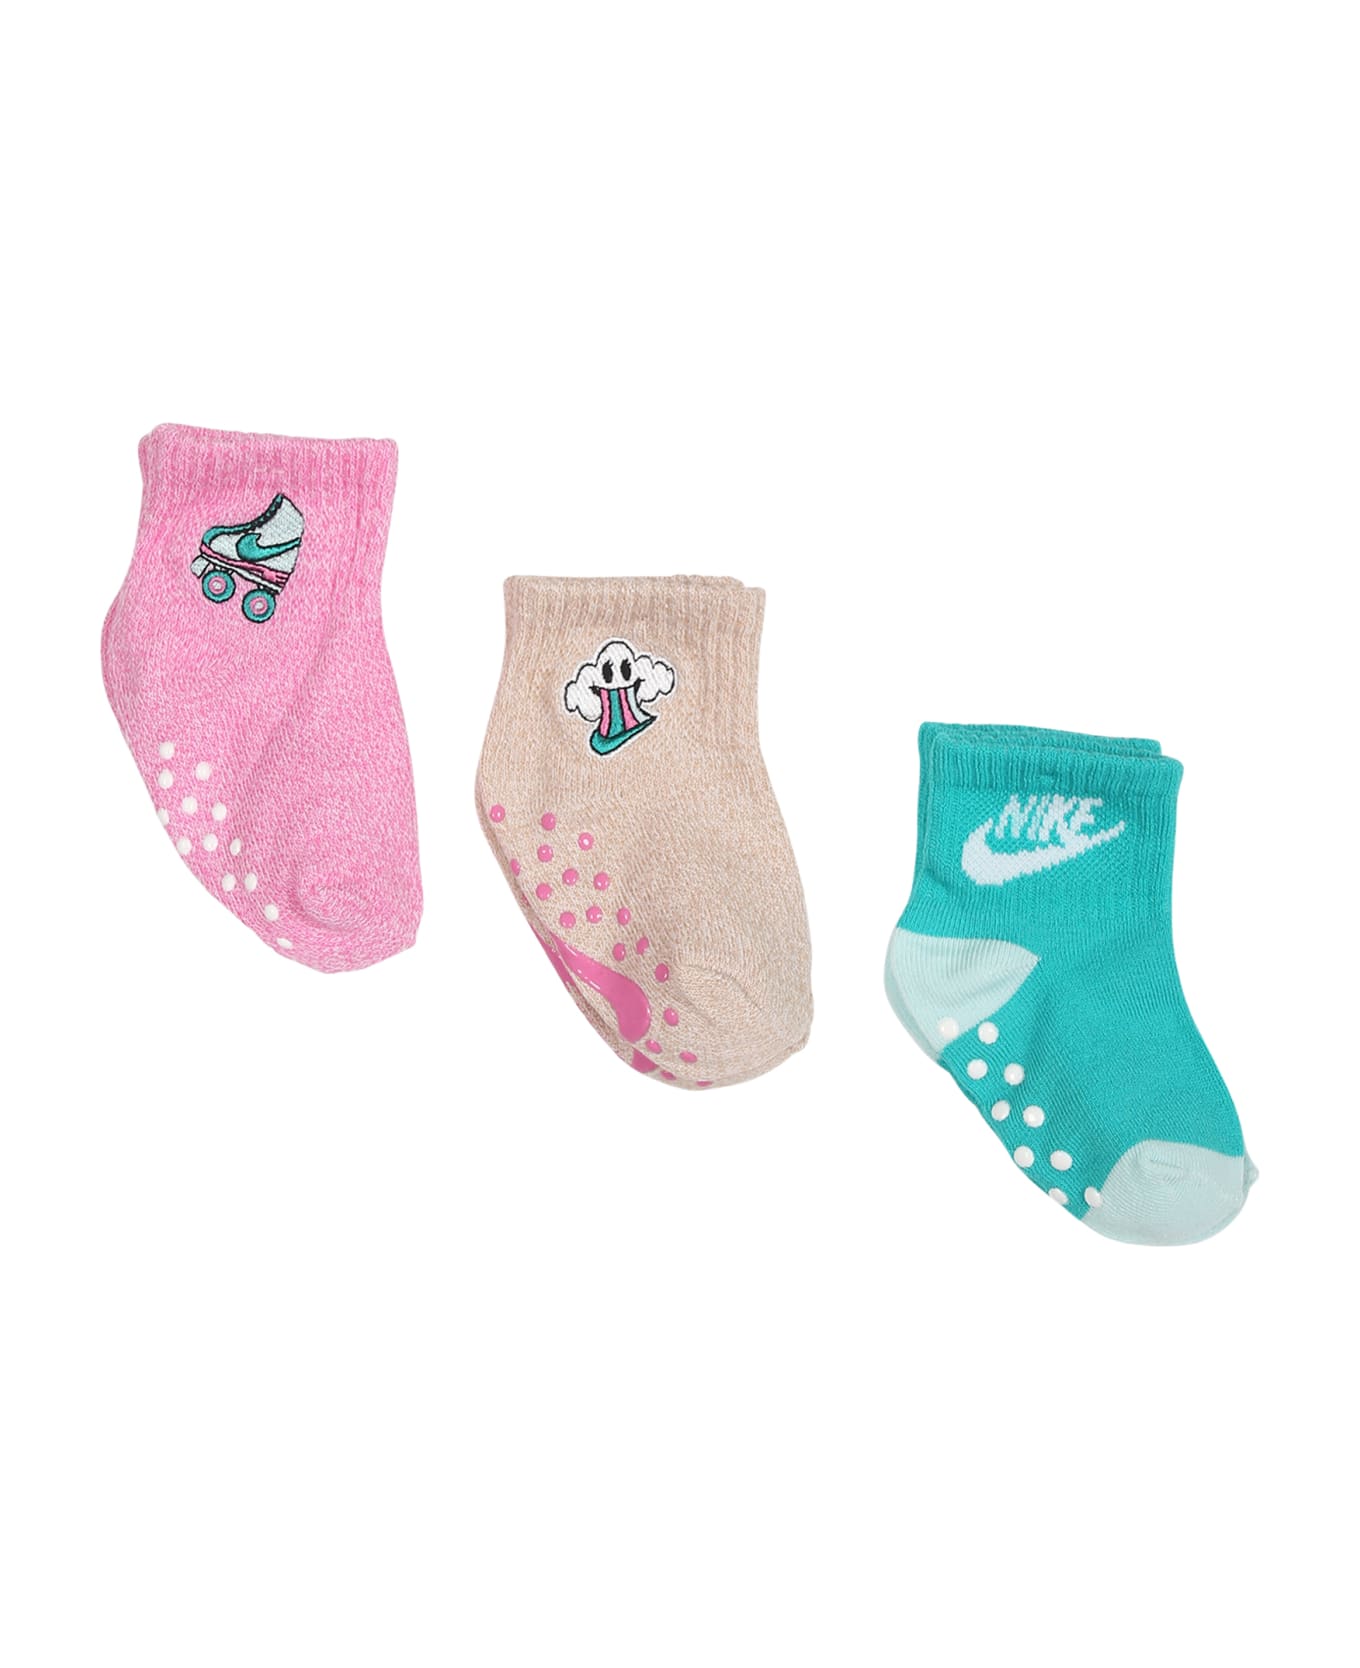 Nike Multicolor Set For Baby Girl With Logo - Multicolor アクセサリー＆ギフト